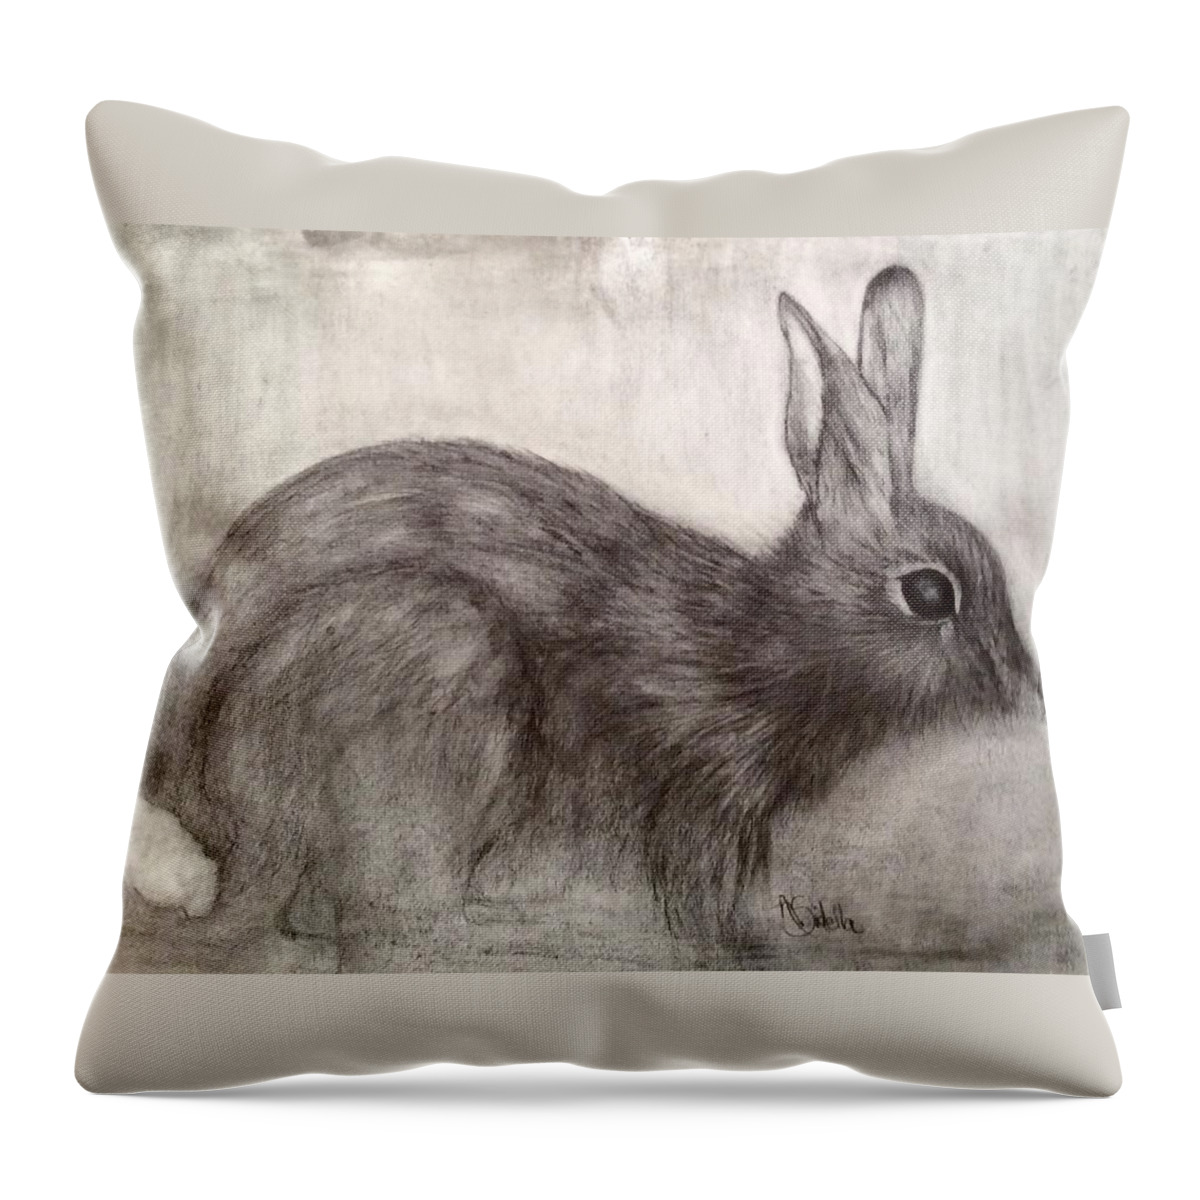 Tennessee Wildlife Throw Pillow featuring the drawing Tennessee Wildlife Cottontail Rabbit by Annamarie Sidella-Felts